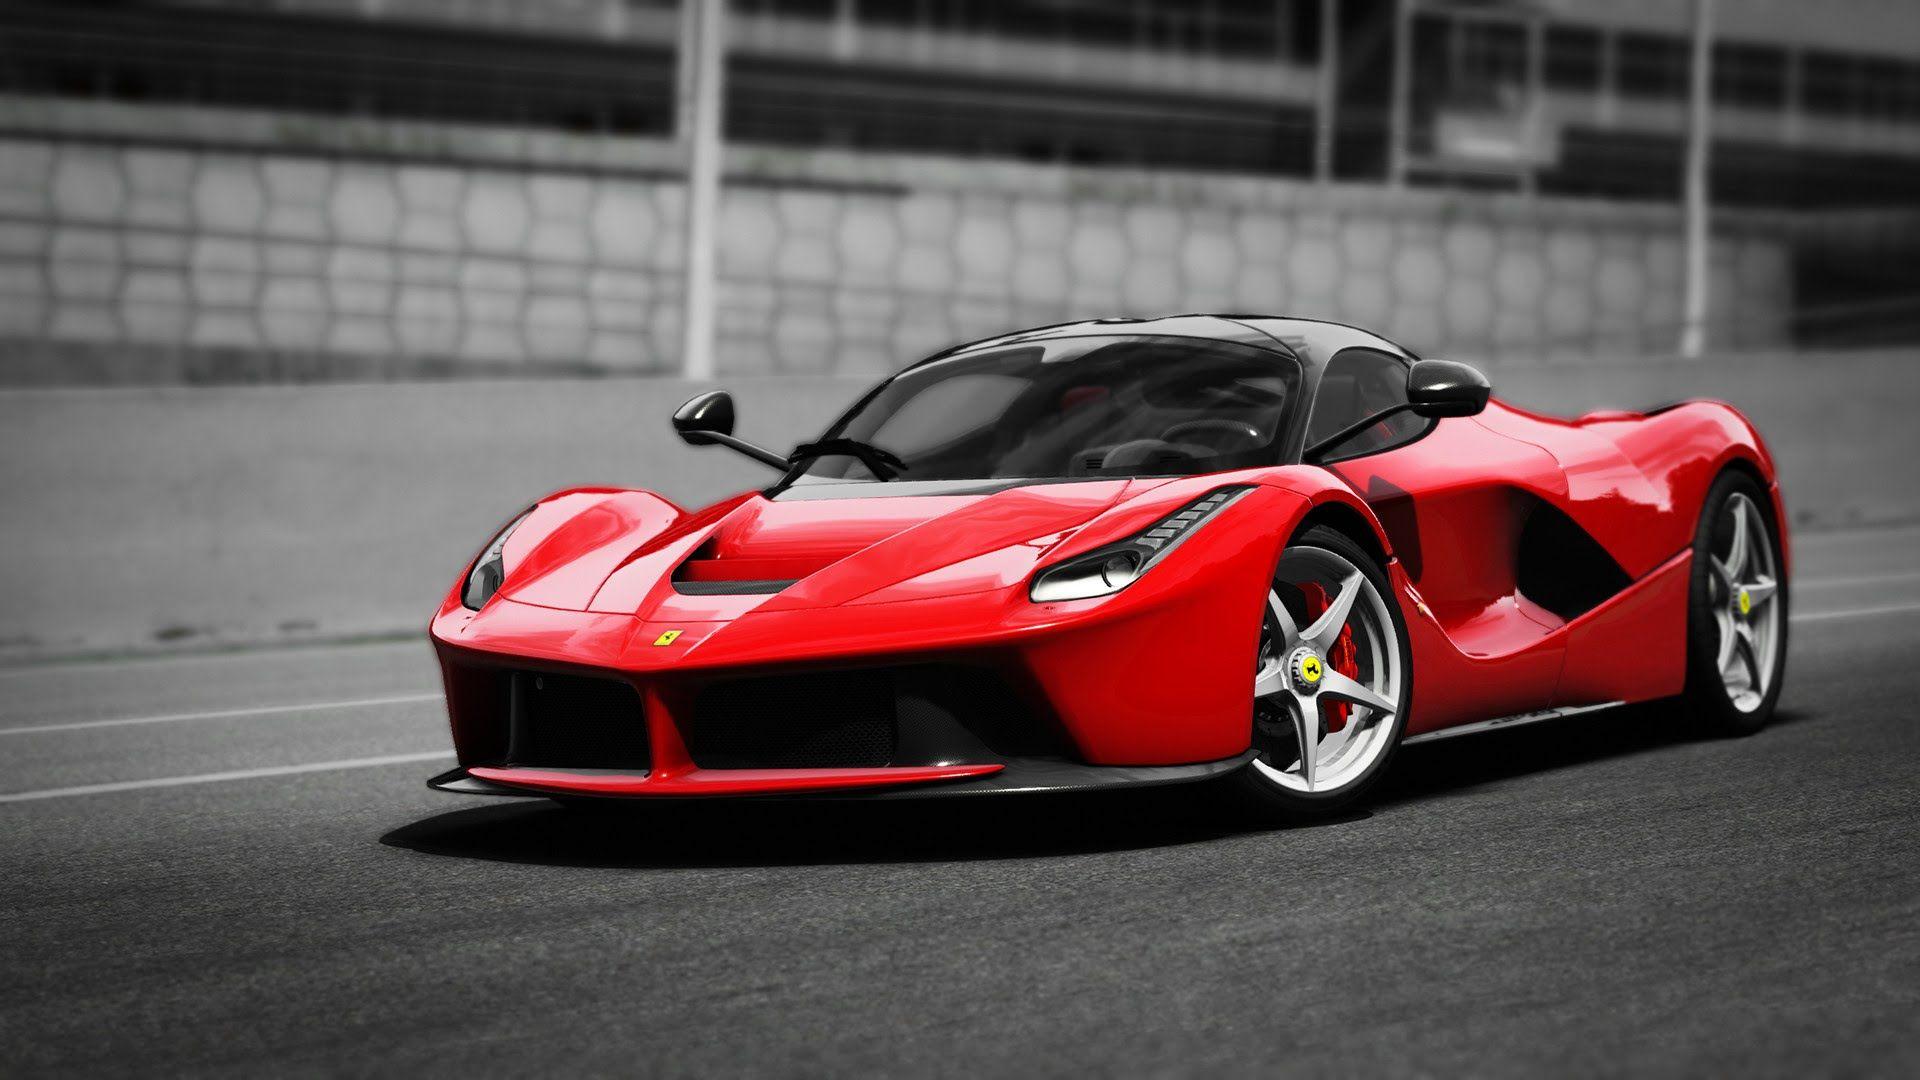 Laferrari 1125x2436 Resolution Wallpapers Iphone XS,Iphone 10,Iphone X